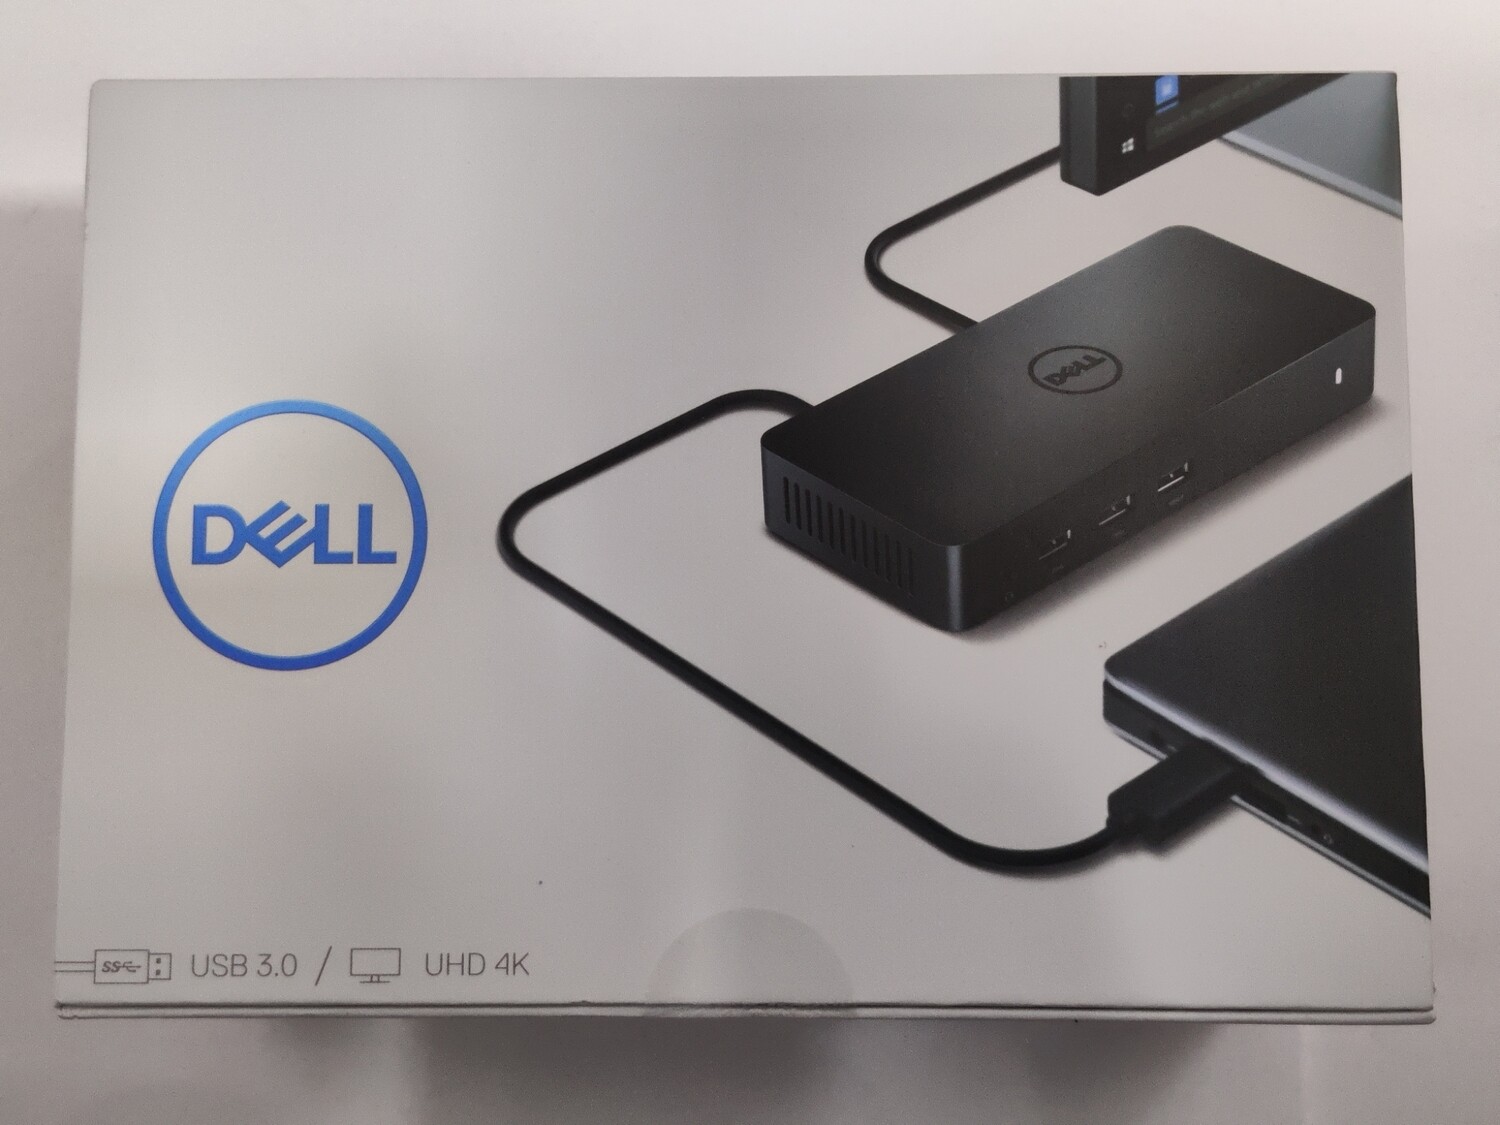 Dell D3100 USB 3.0 Ultra HD Triple Video Docking Station, Rs.10750 – LT  Online Store